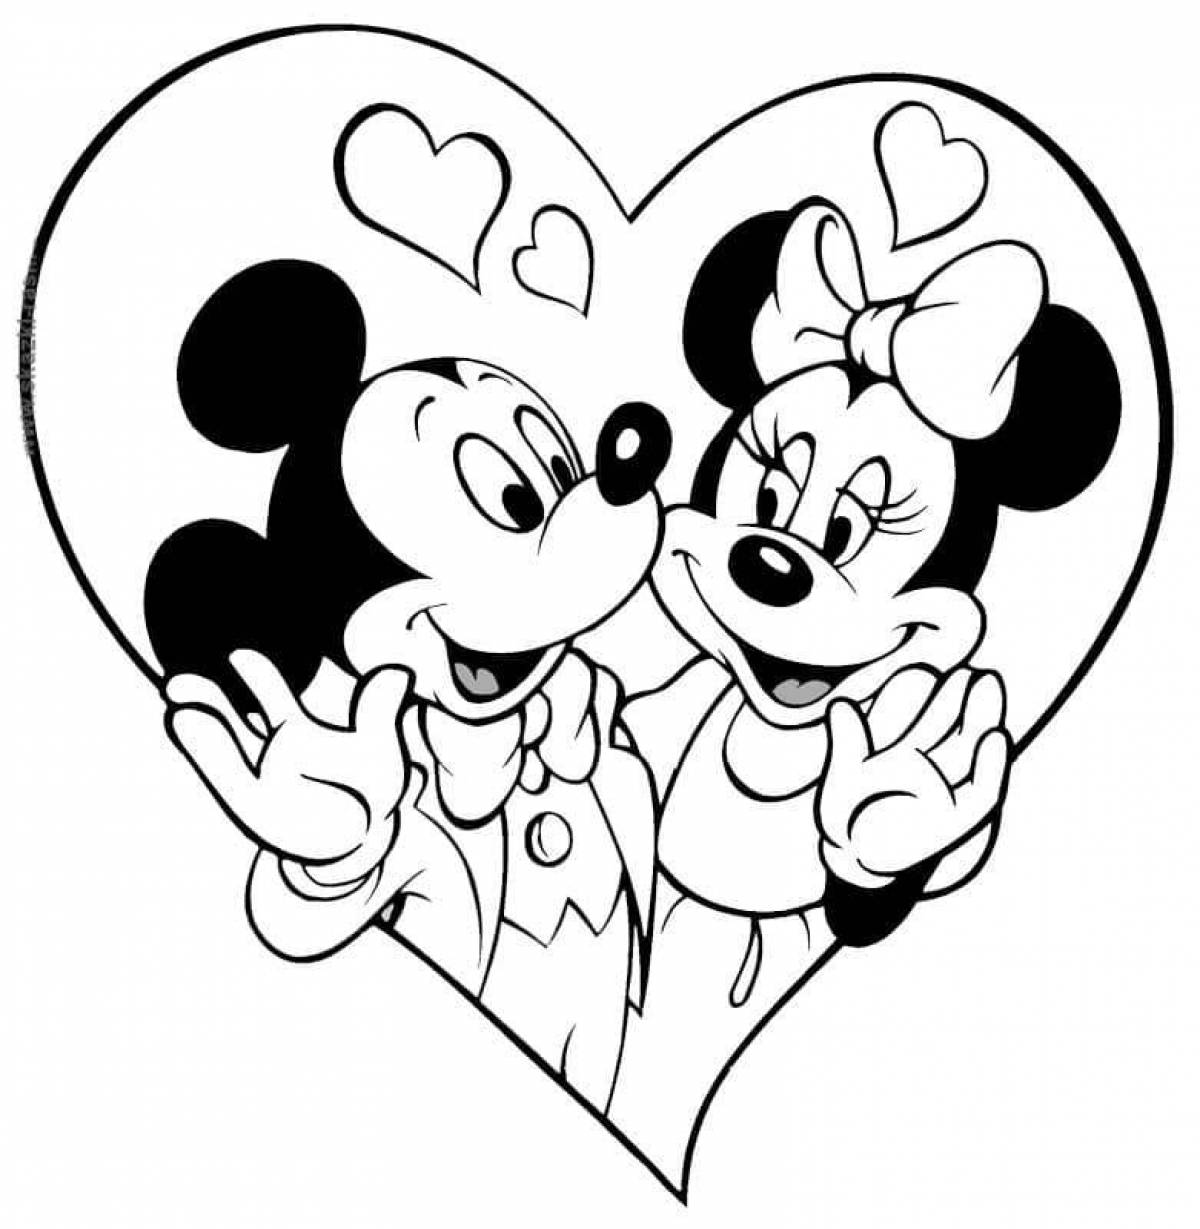 Adorable love coloring page